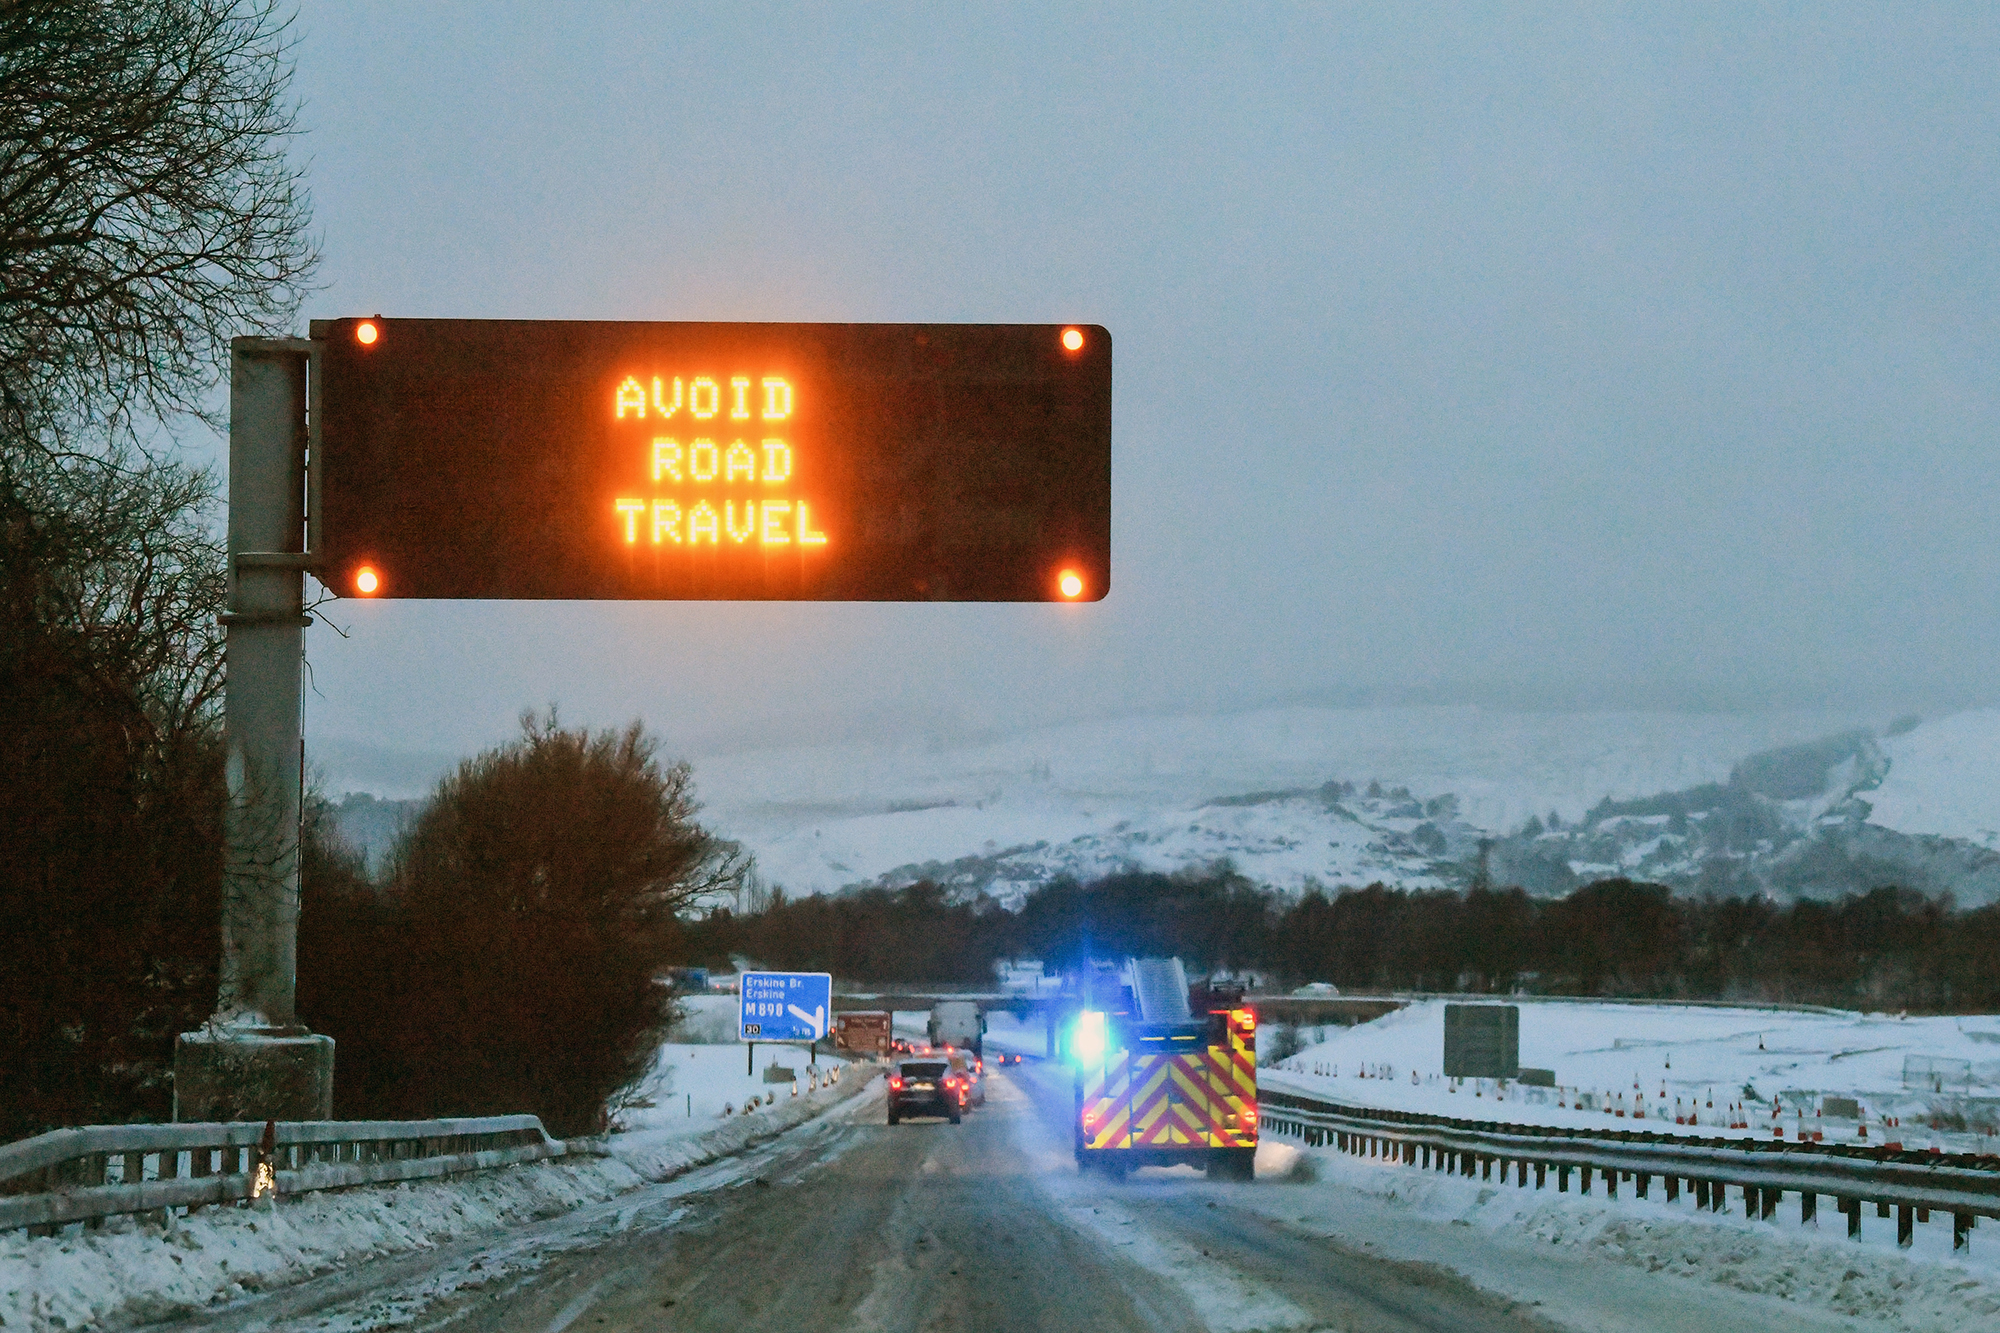 GLASGOW, UNITED KINGDOM - FEBRUARY 28: A road warning sign advising not to travel on the M8 on February 28, in Glasgow, Scotland. Freezing weather conditions dubbed the 'Beast from the East' bring snow and sub-zero temperatures to the UK. Amber warnings are in place in northern England, the East Midlands, London, the east and south-east of England. Scotland's weather warning has been upgraded to red, which means risk to life, widespread damage, travel and power disruption are likely. (Photo by Jeff J Mitchell/Getty Images)